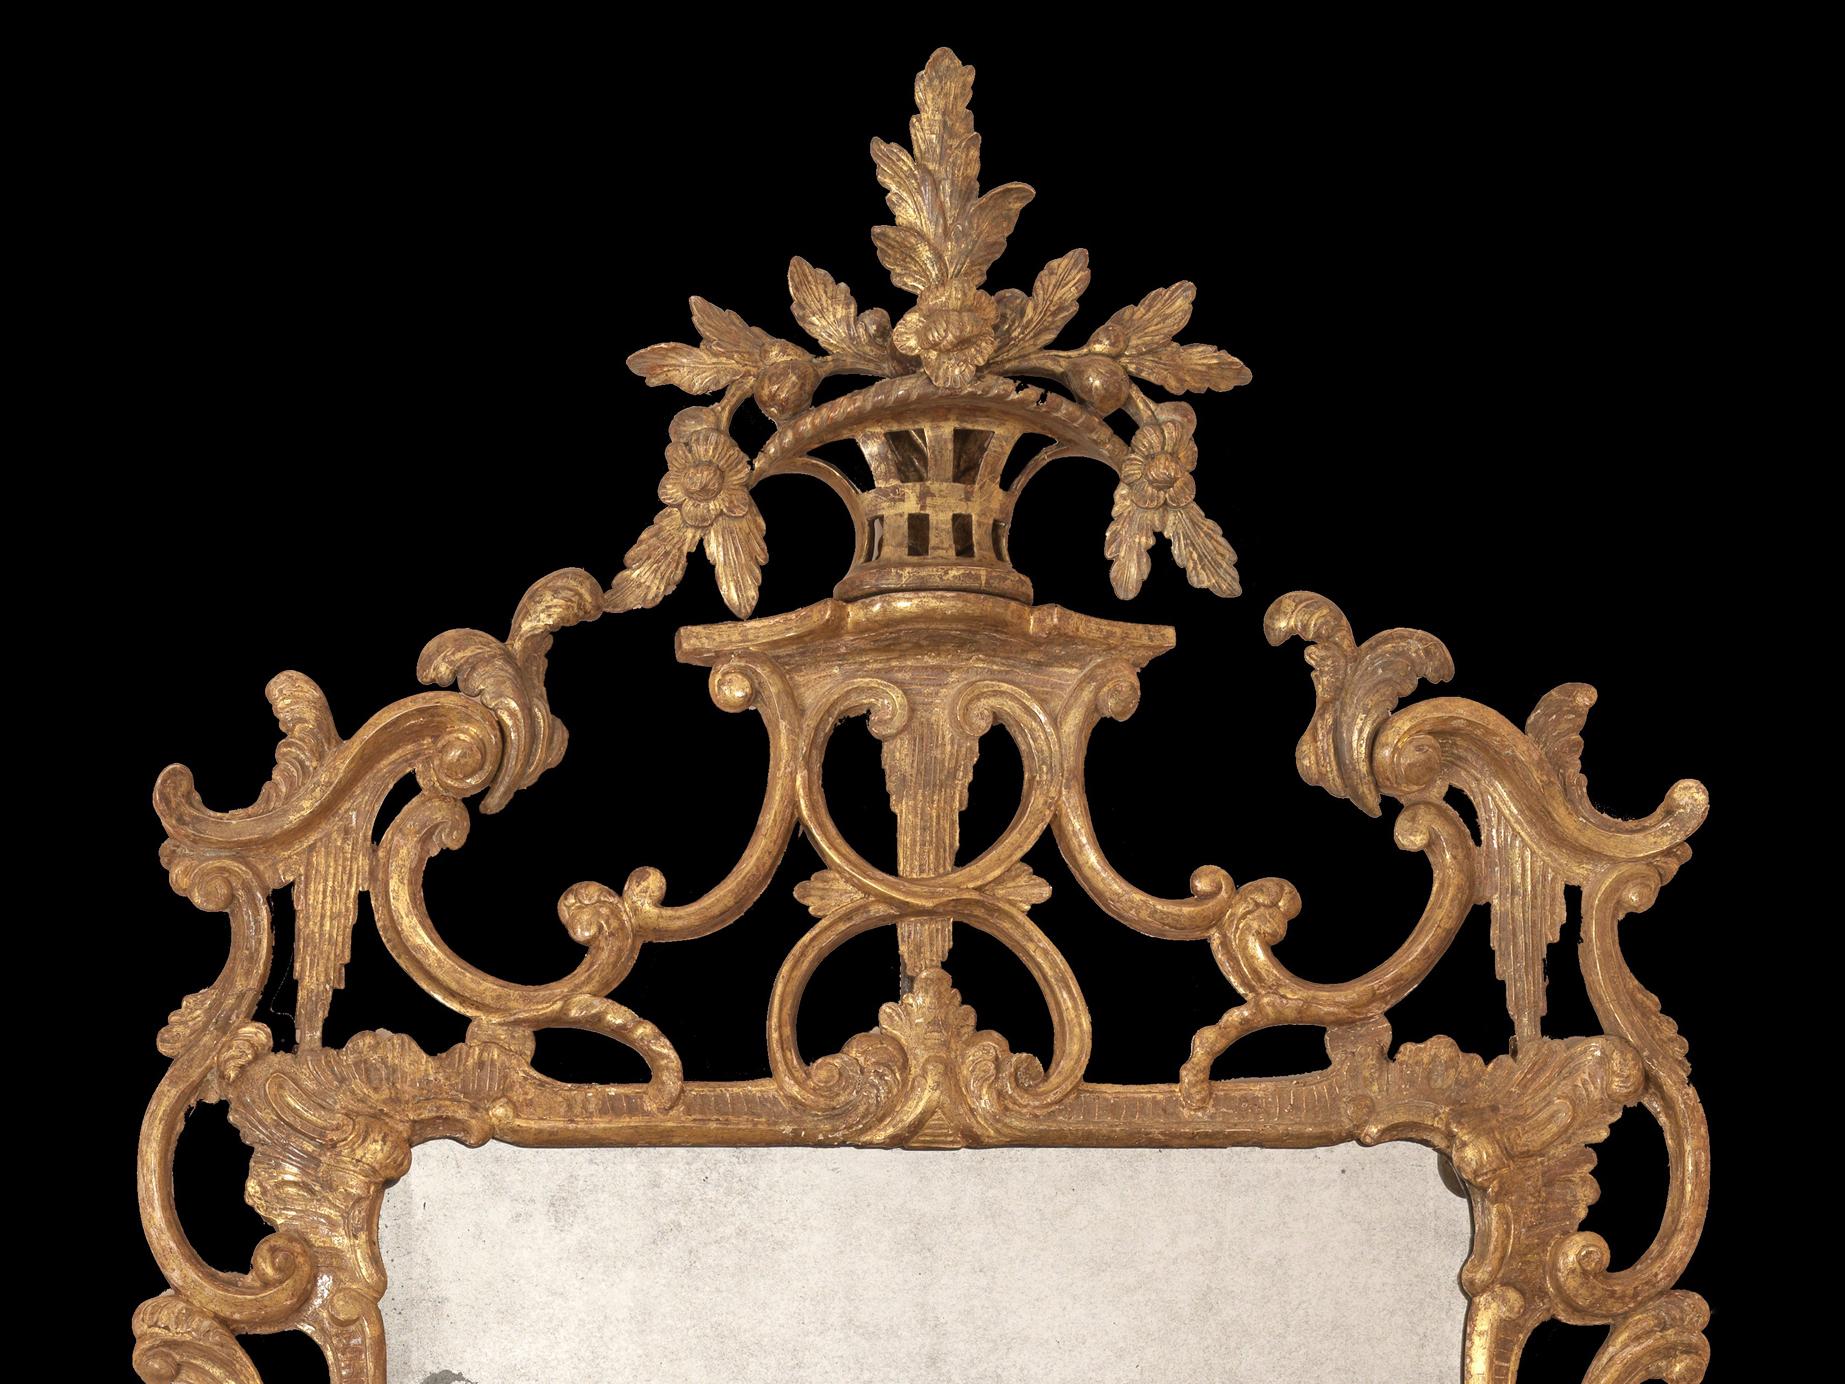 A fine quality mid-18th century Chippendale period carved giltwood mirror. The rectangular border glass mirror, retaining its original gilding and original plate, within a design of sweeping and delicate C–scrolls and acanthus leaf, pierced foliate